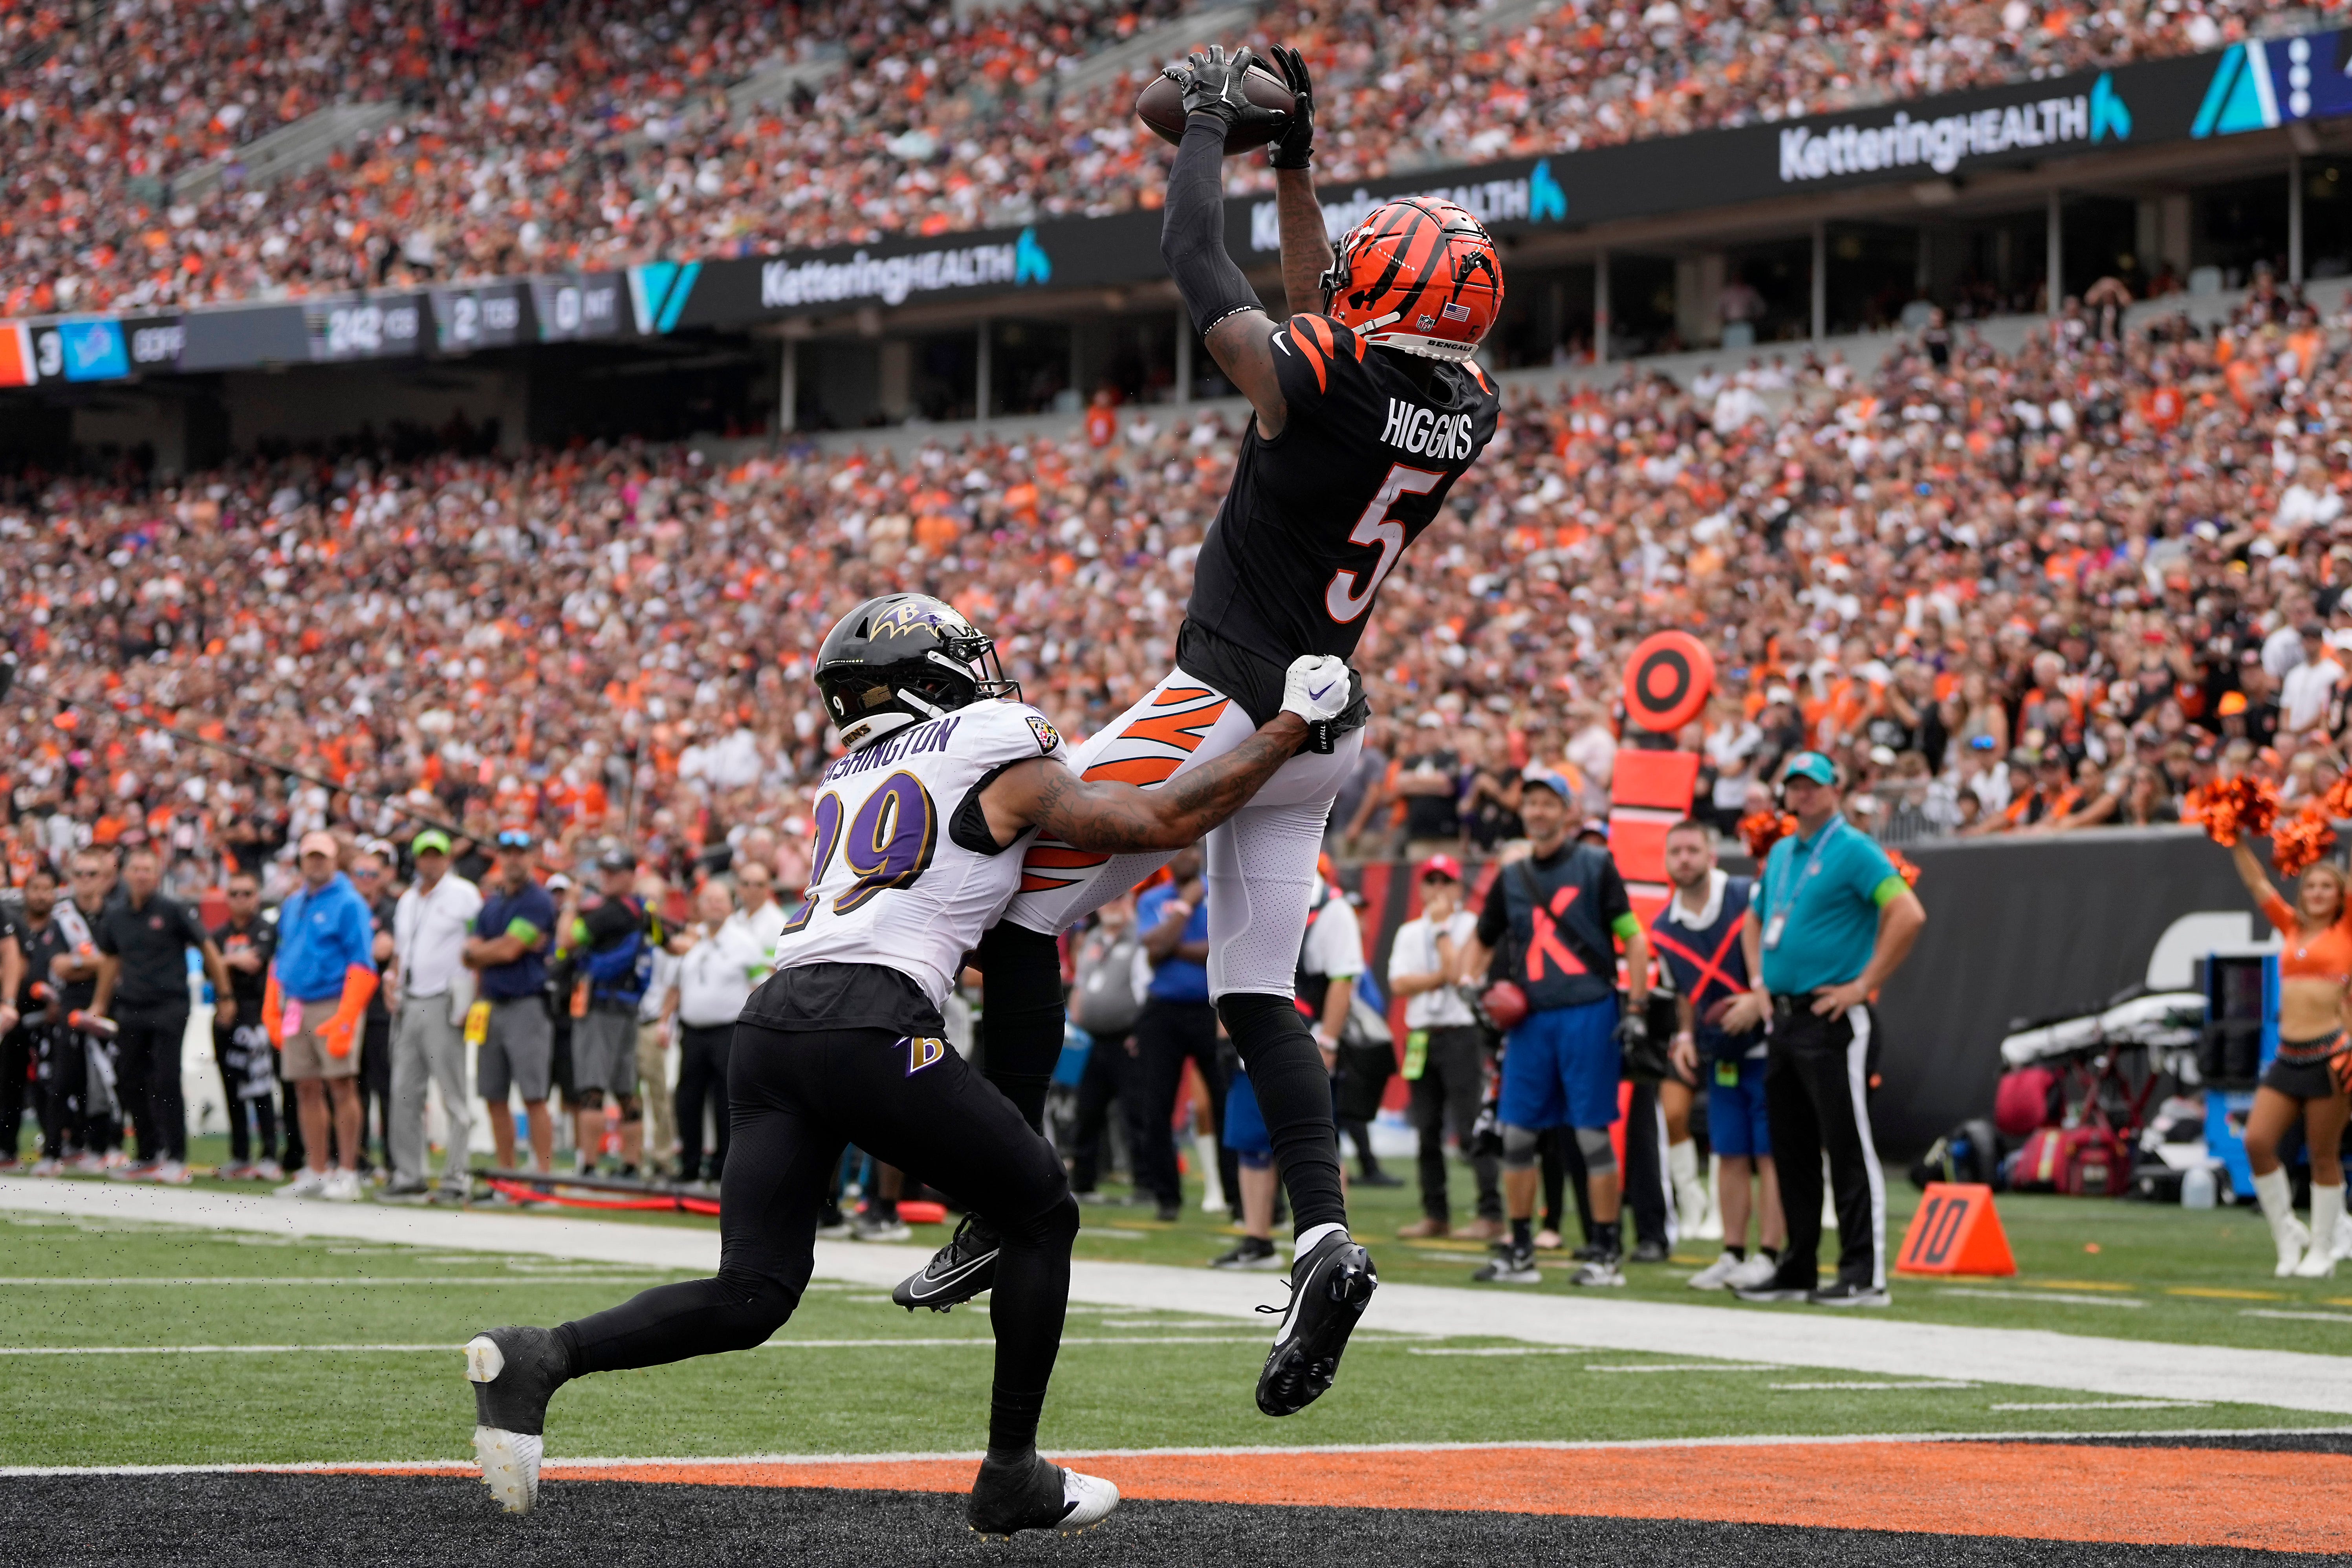 Cincinnati Bengals wide receiver Tee Higgins (5) catches a touchdown as Baltimore Ravens safety Ar'Darius Washington (29) defends in the third quarter of a Week 2 NFL football game between the Baltimore Ravens and the Cincinnati Bengals Sunday, Sept. 17, 2023, at Paycor Stadium in Cincinnati.